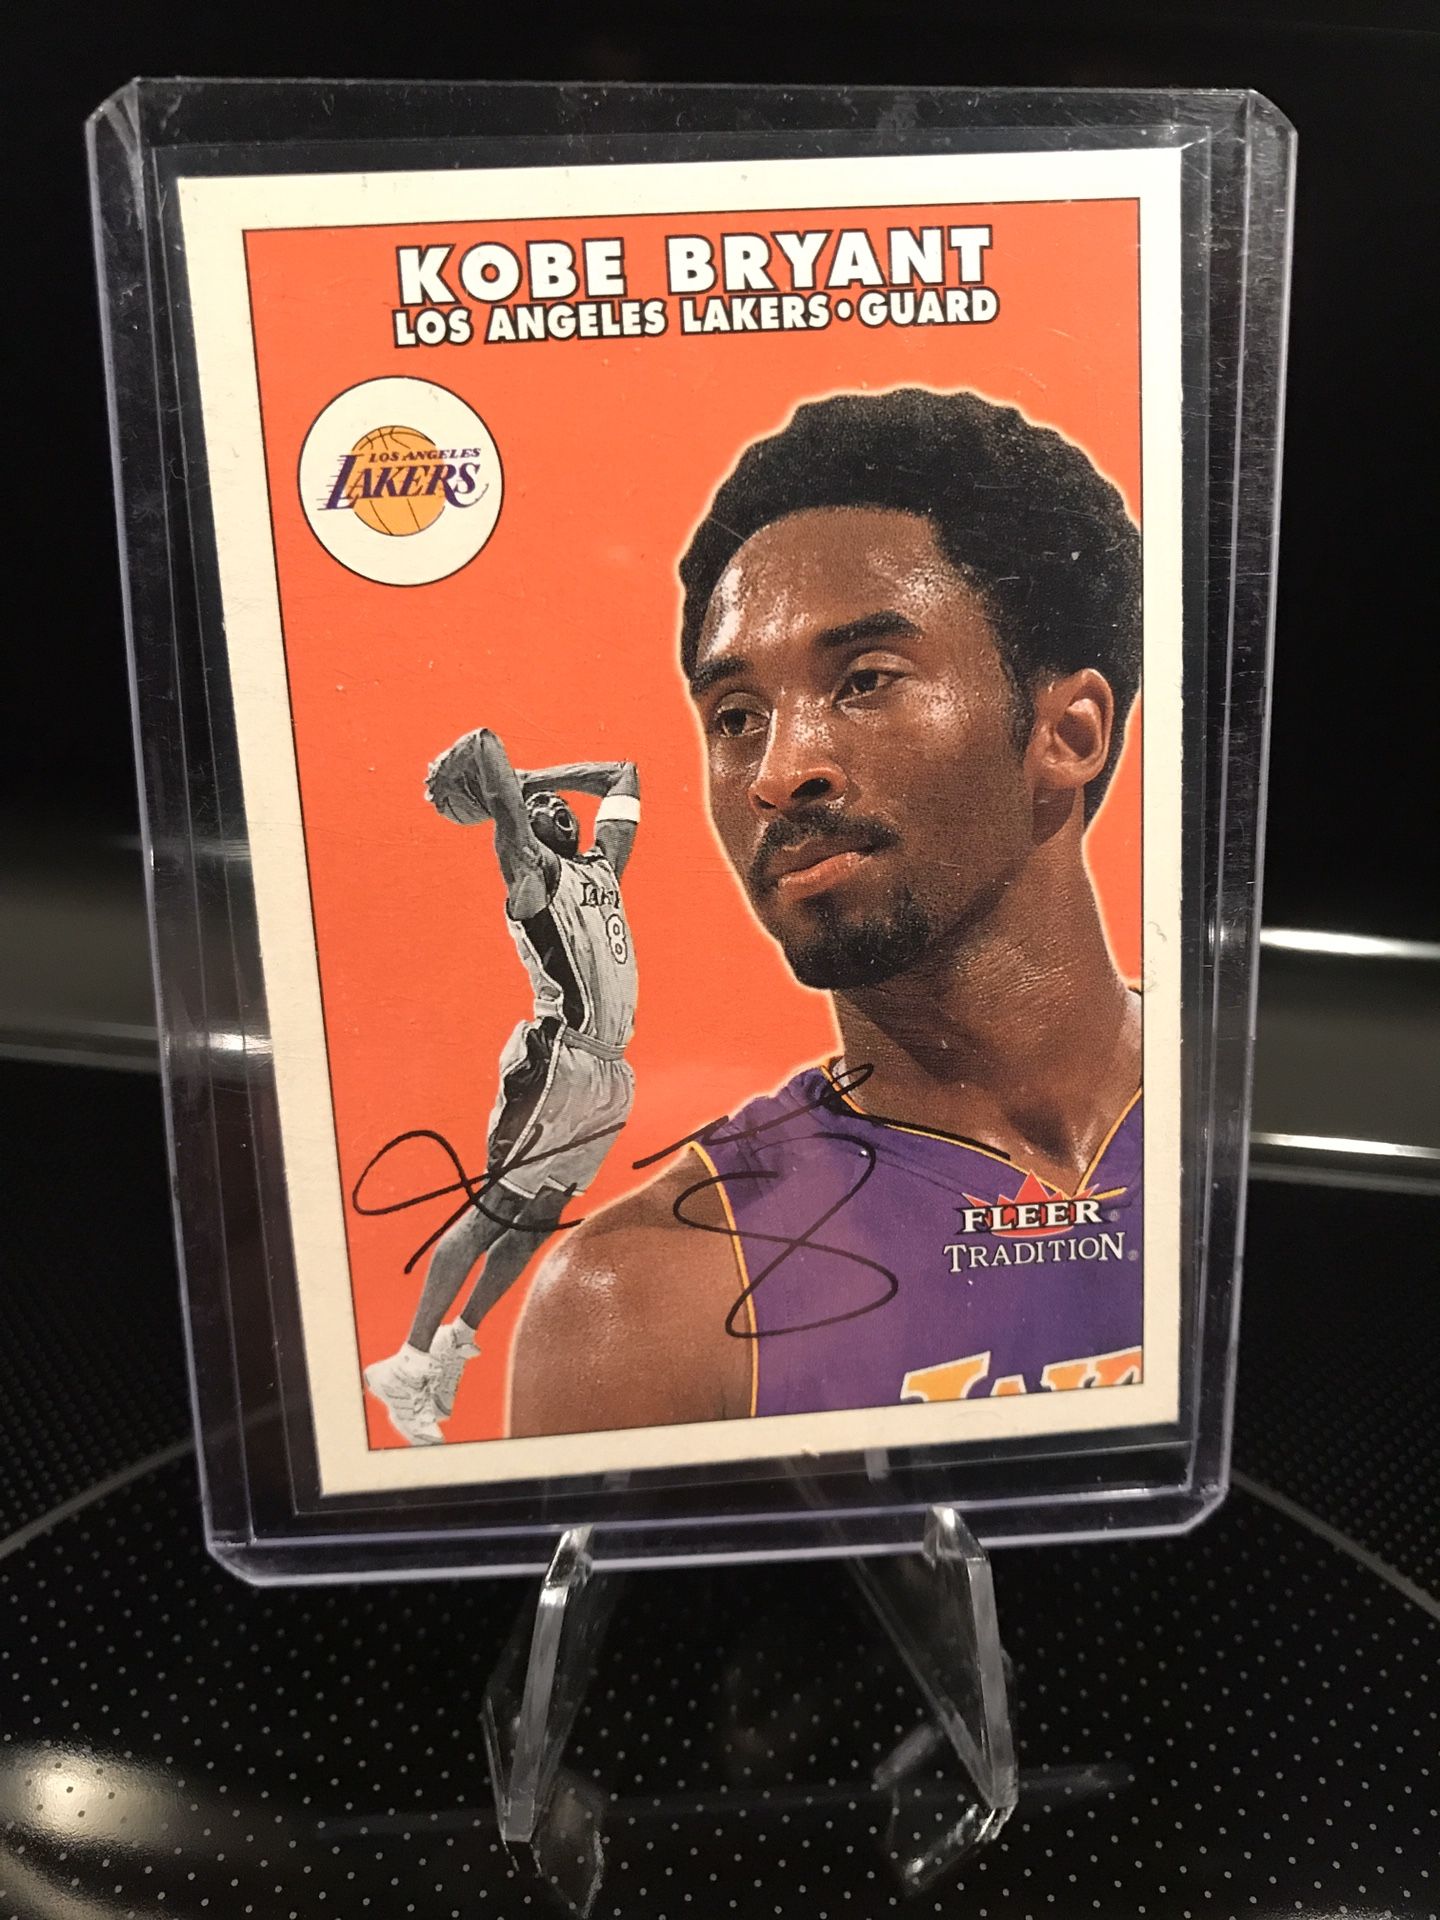 Fleer Tradition Kobe Bryant Signature Card - Lakers Jersey 8 NBA Collectible - MINT - $59 OBO